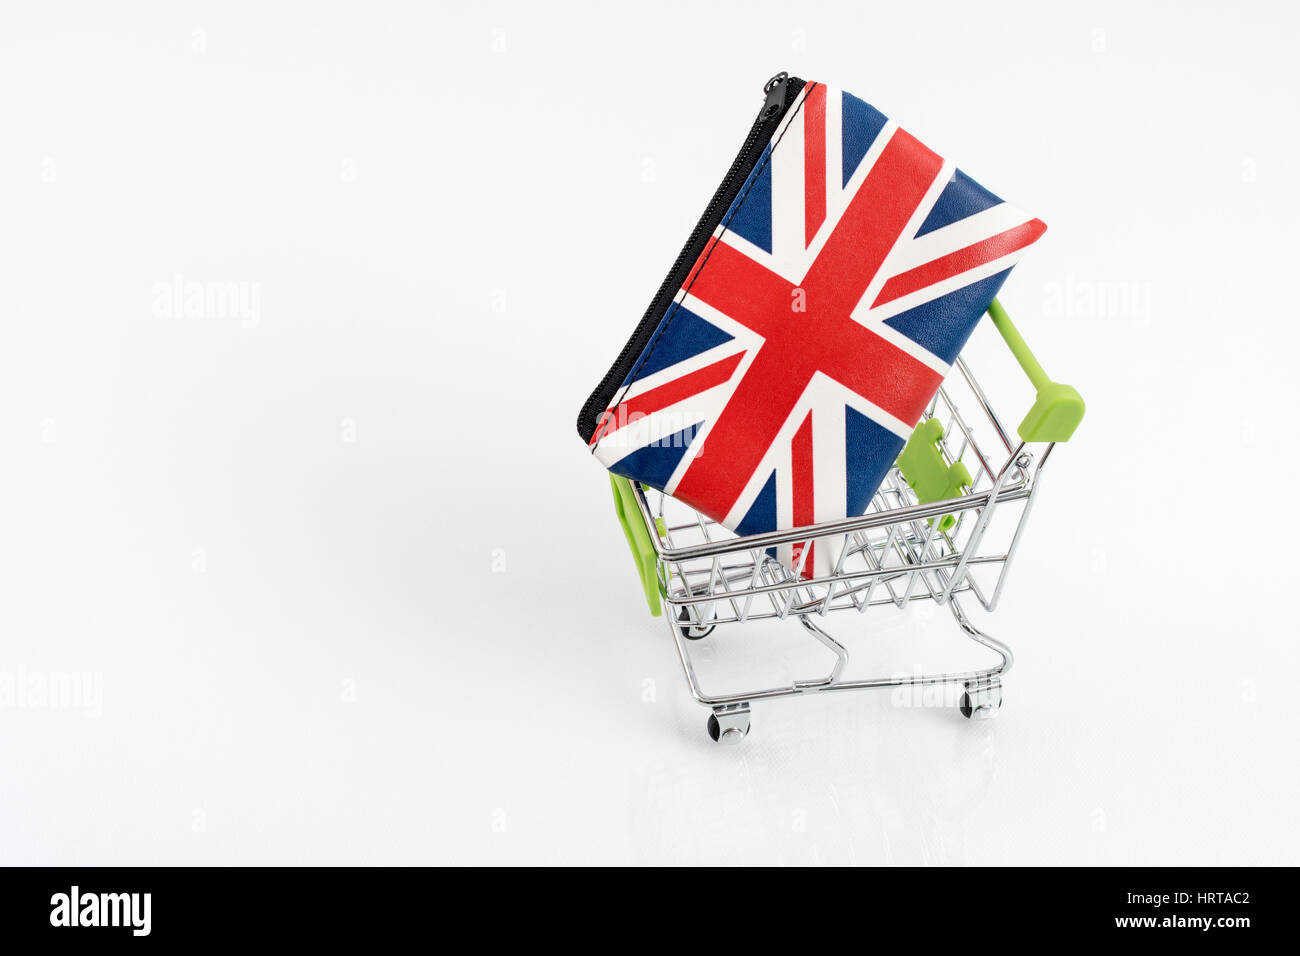 Union Jack coin purse / wallet in toy shopping trolley. Metaphor UK consumer spending, economy & retail/high street sales, cost of living, low income. Stock Photo